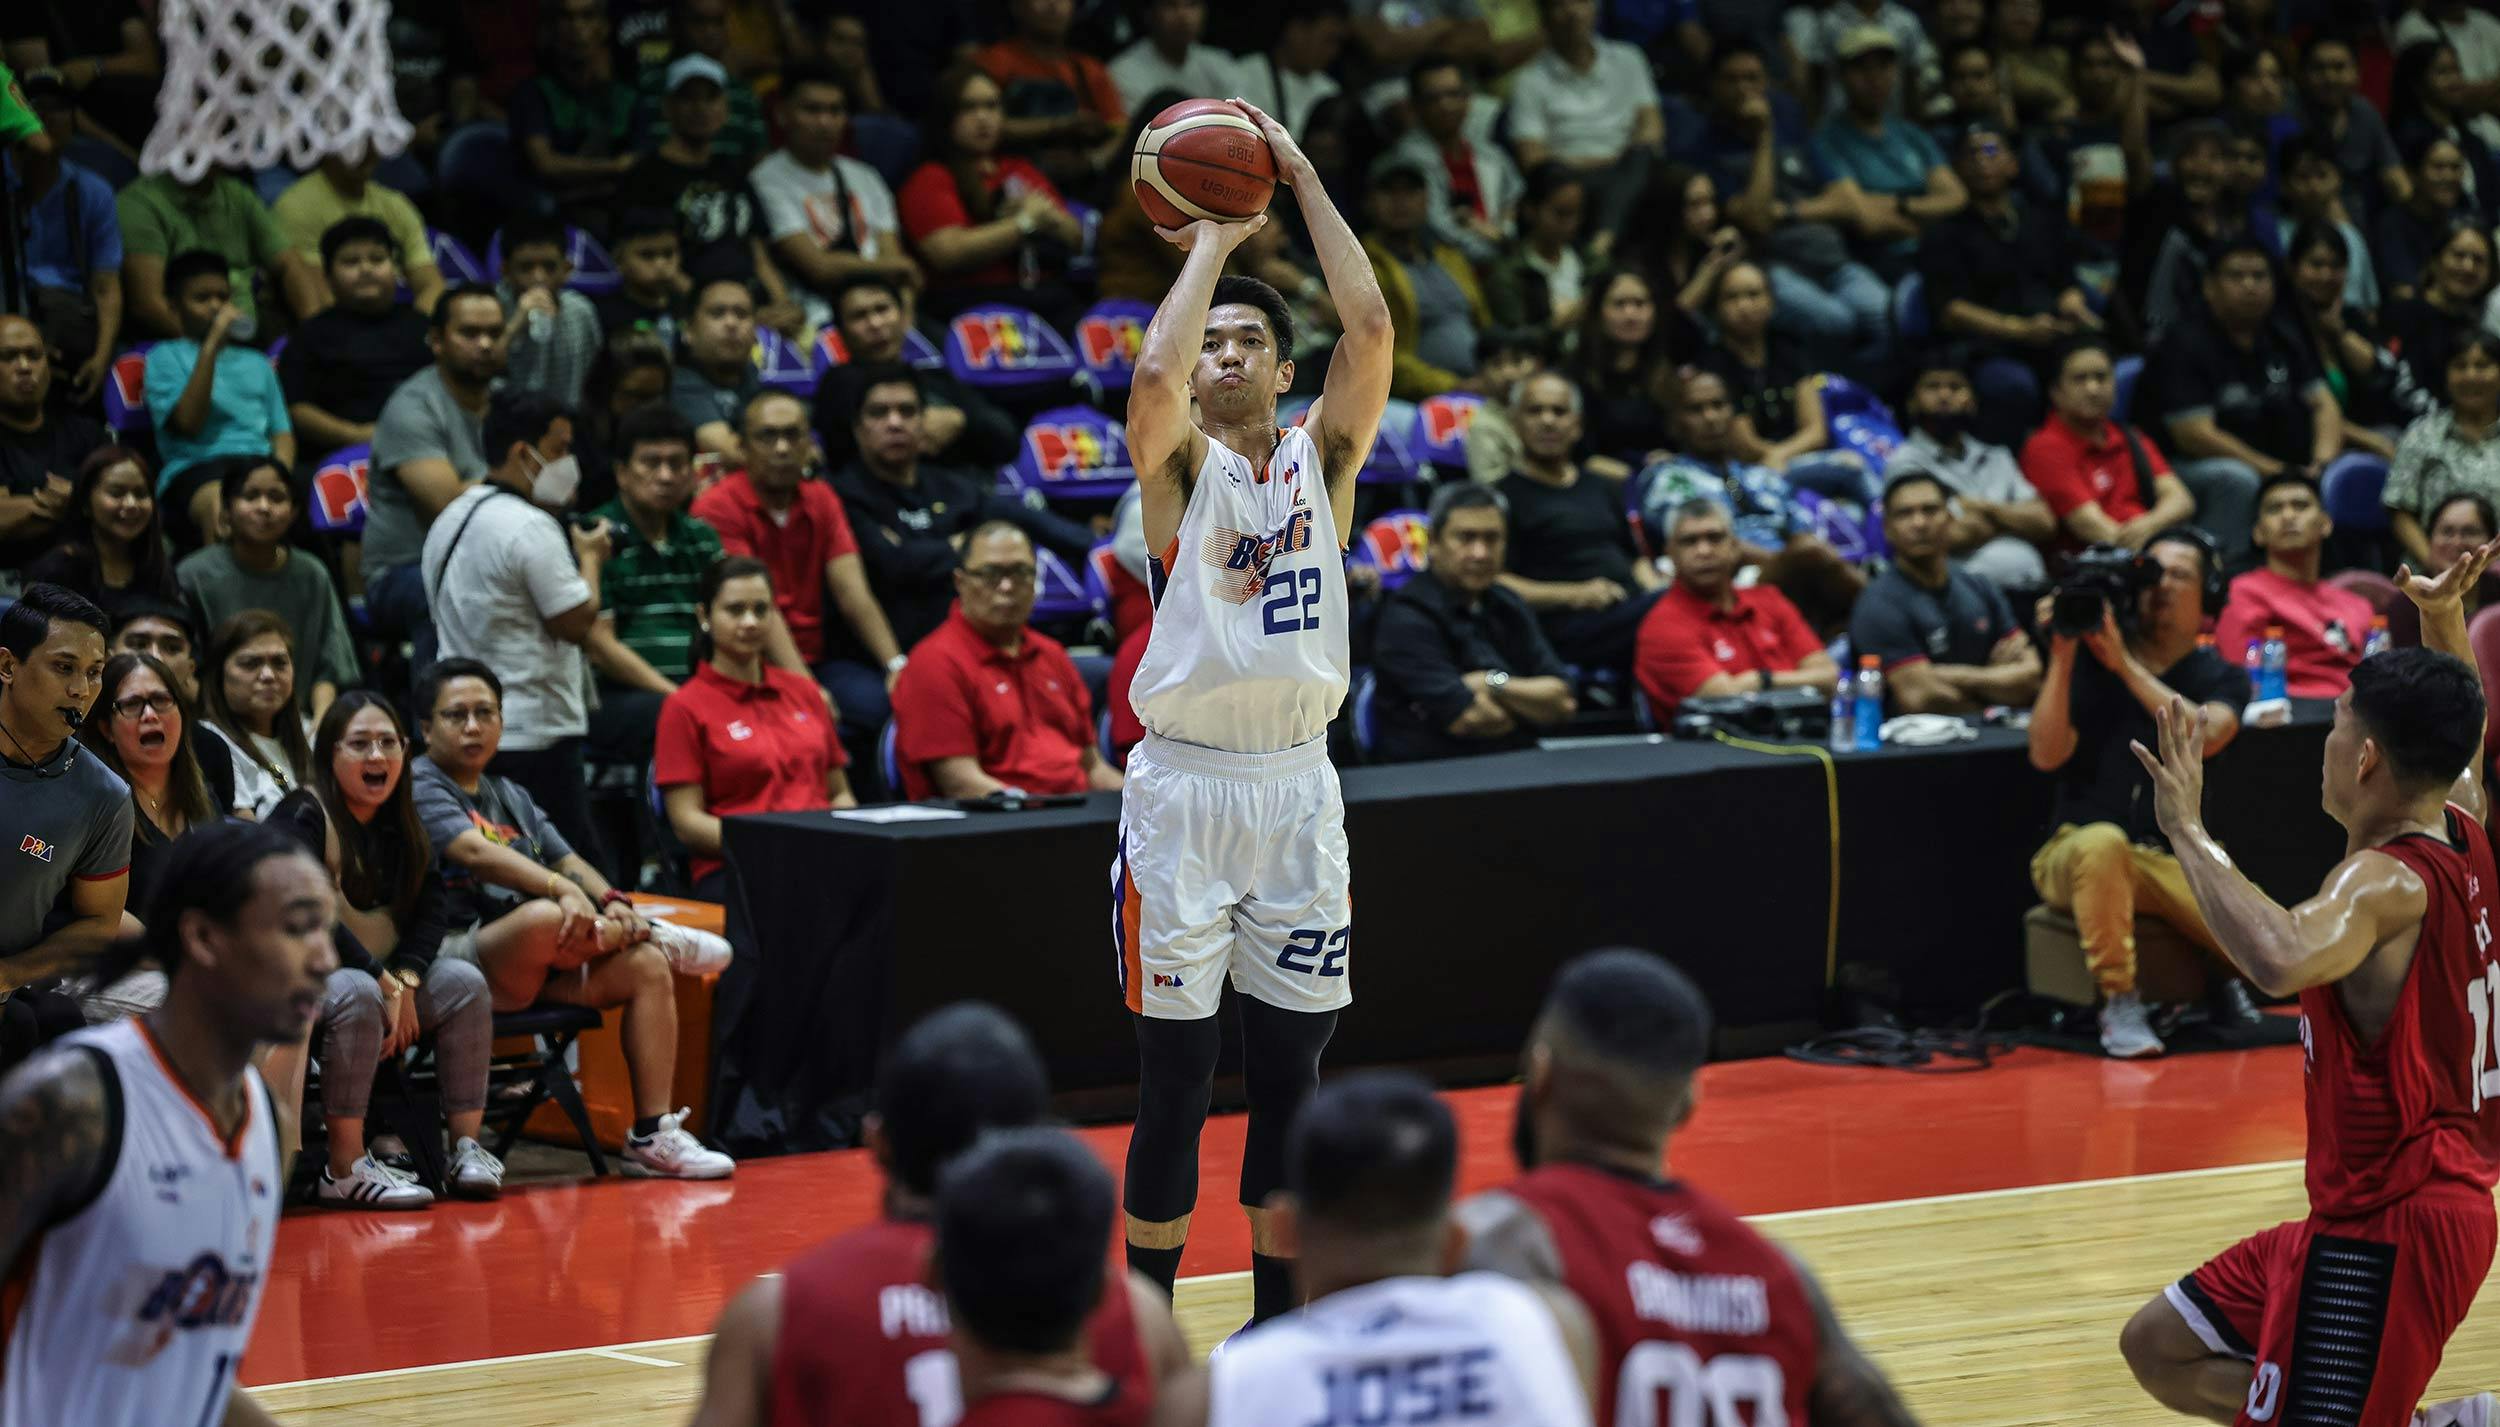 PBA: Allein Maliksi, Chris Newsome come up clutch as Meralco edges Ginebra, forces do-or-die Game 7